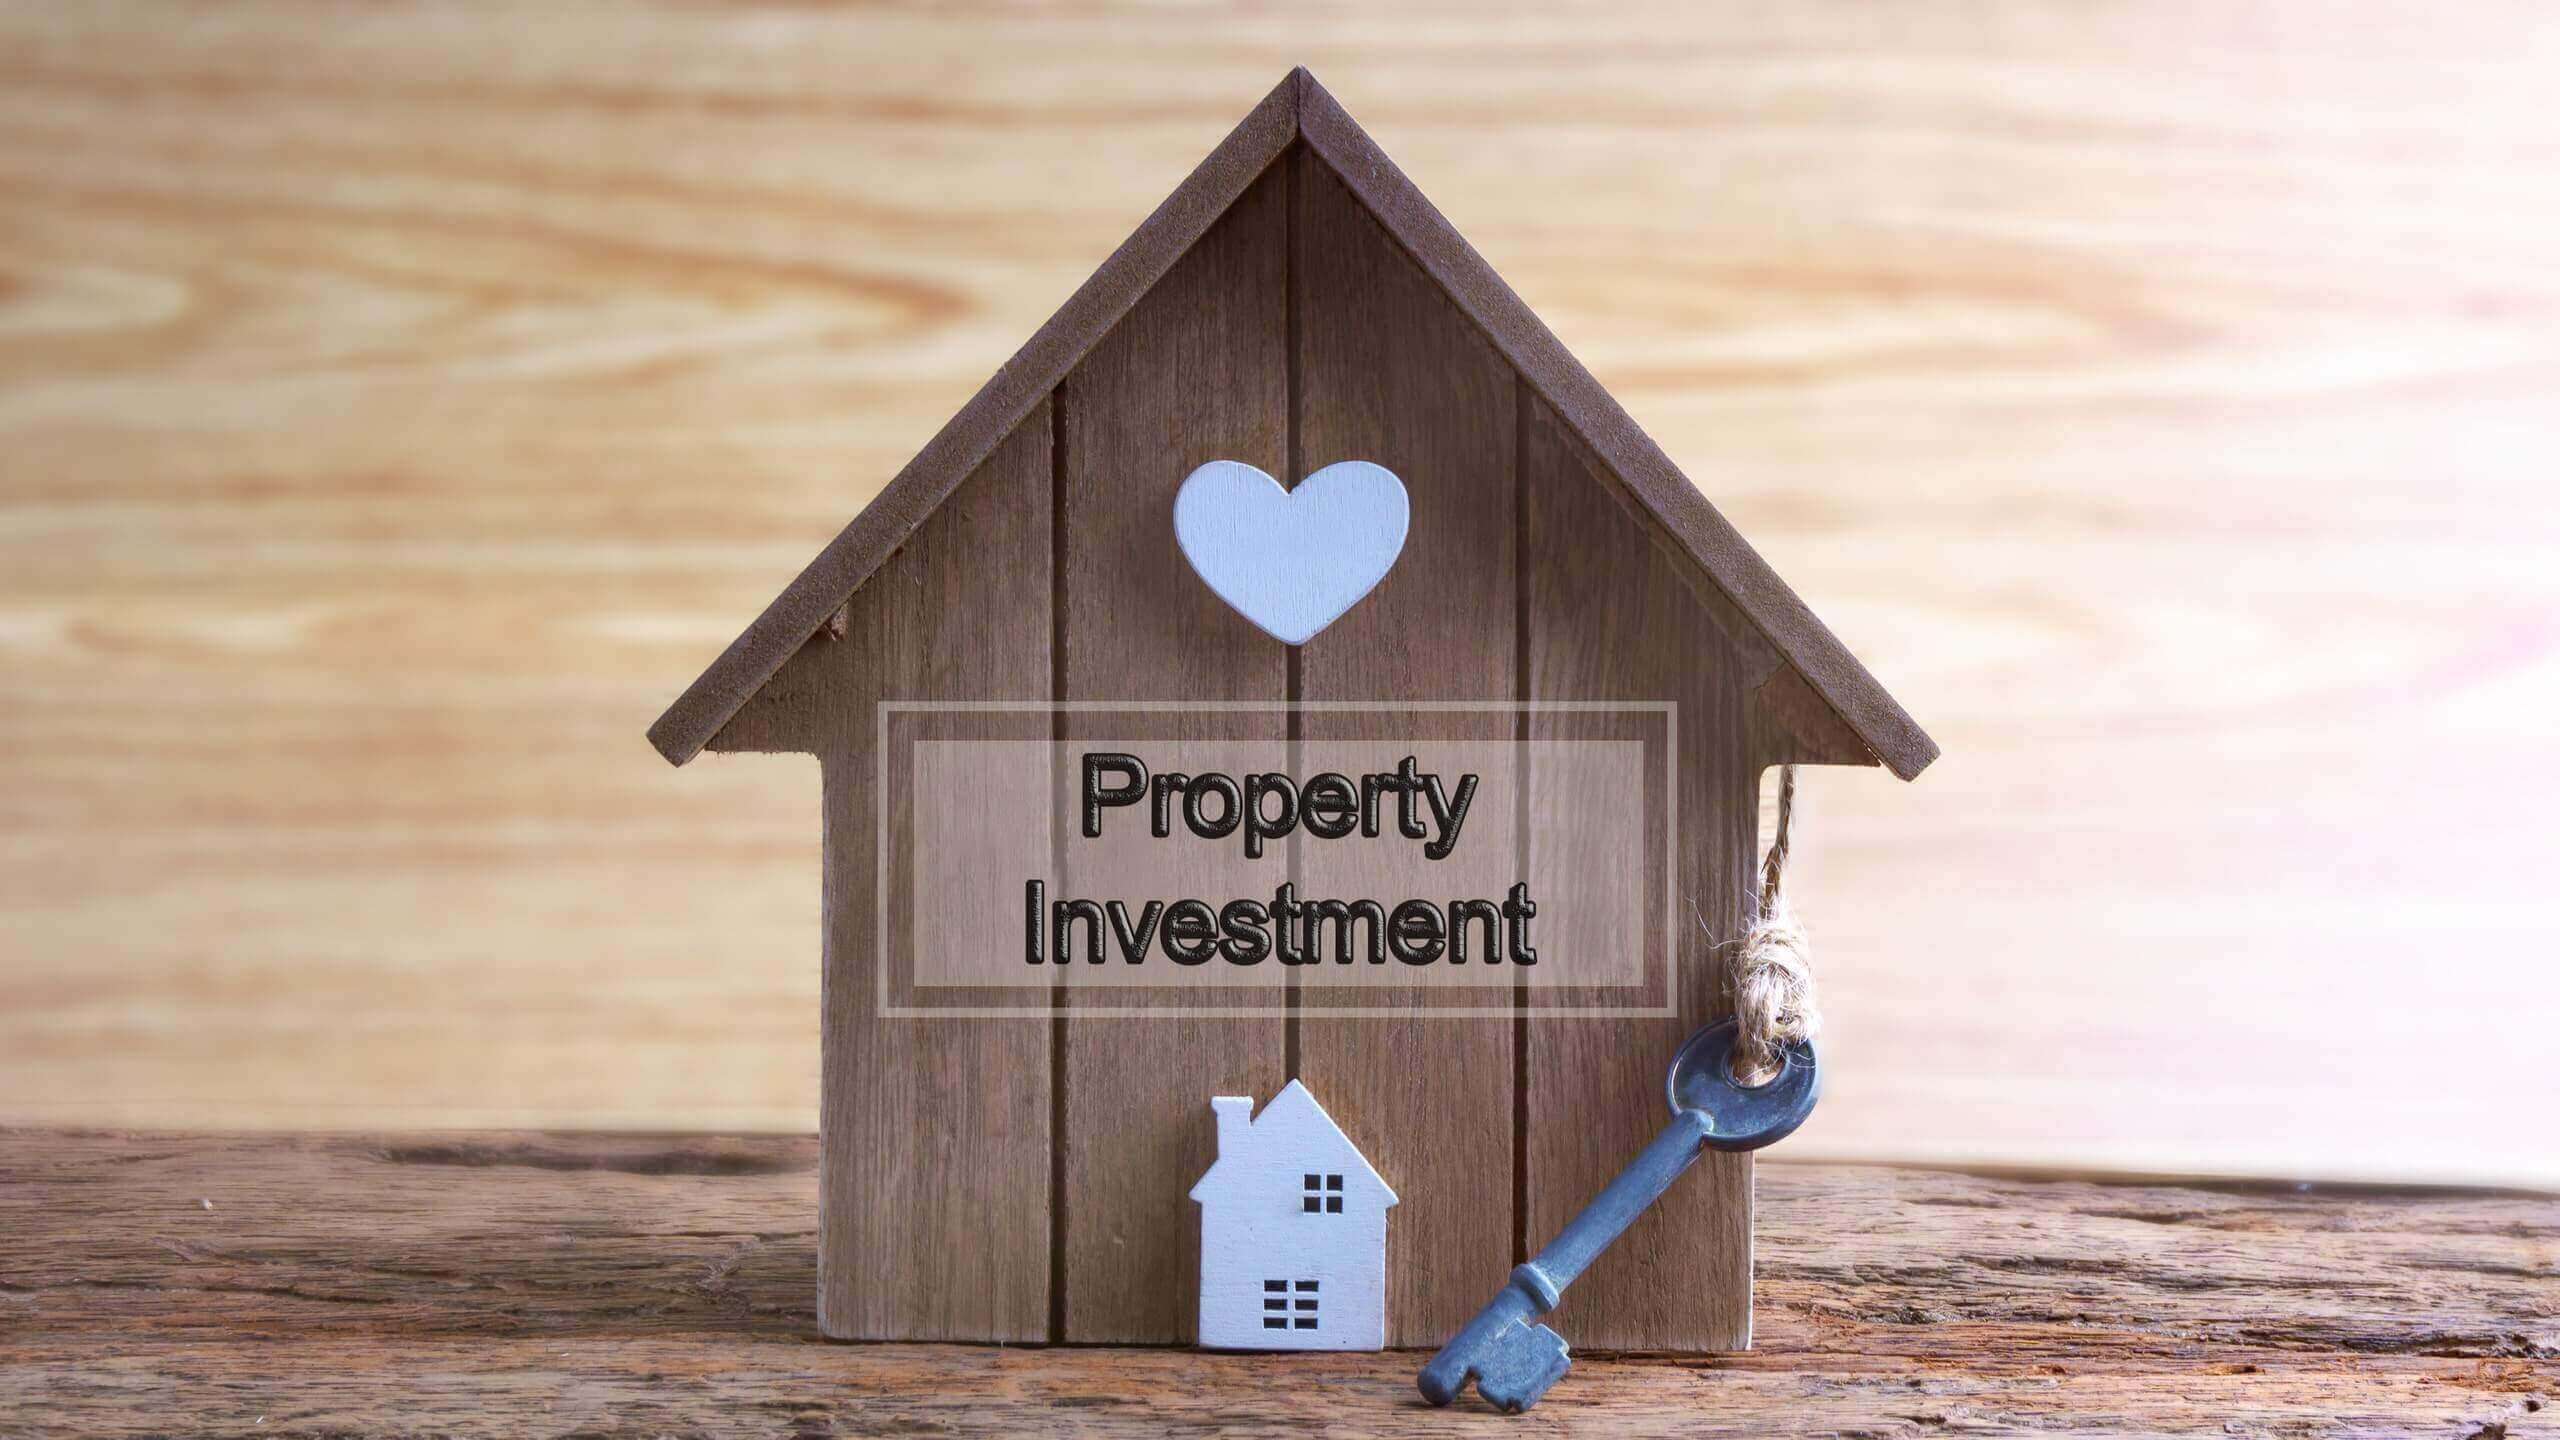 Residential Property Investment in Hyderabad